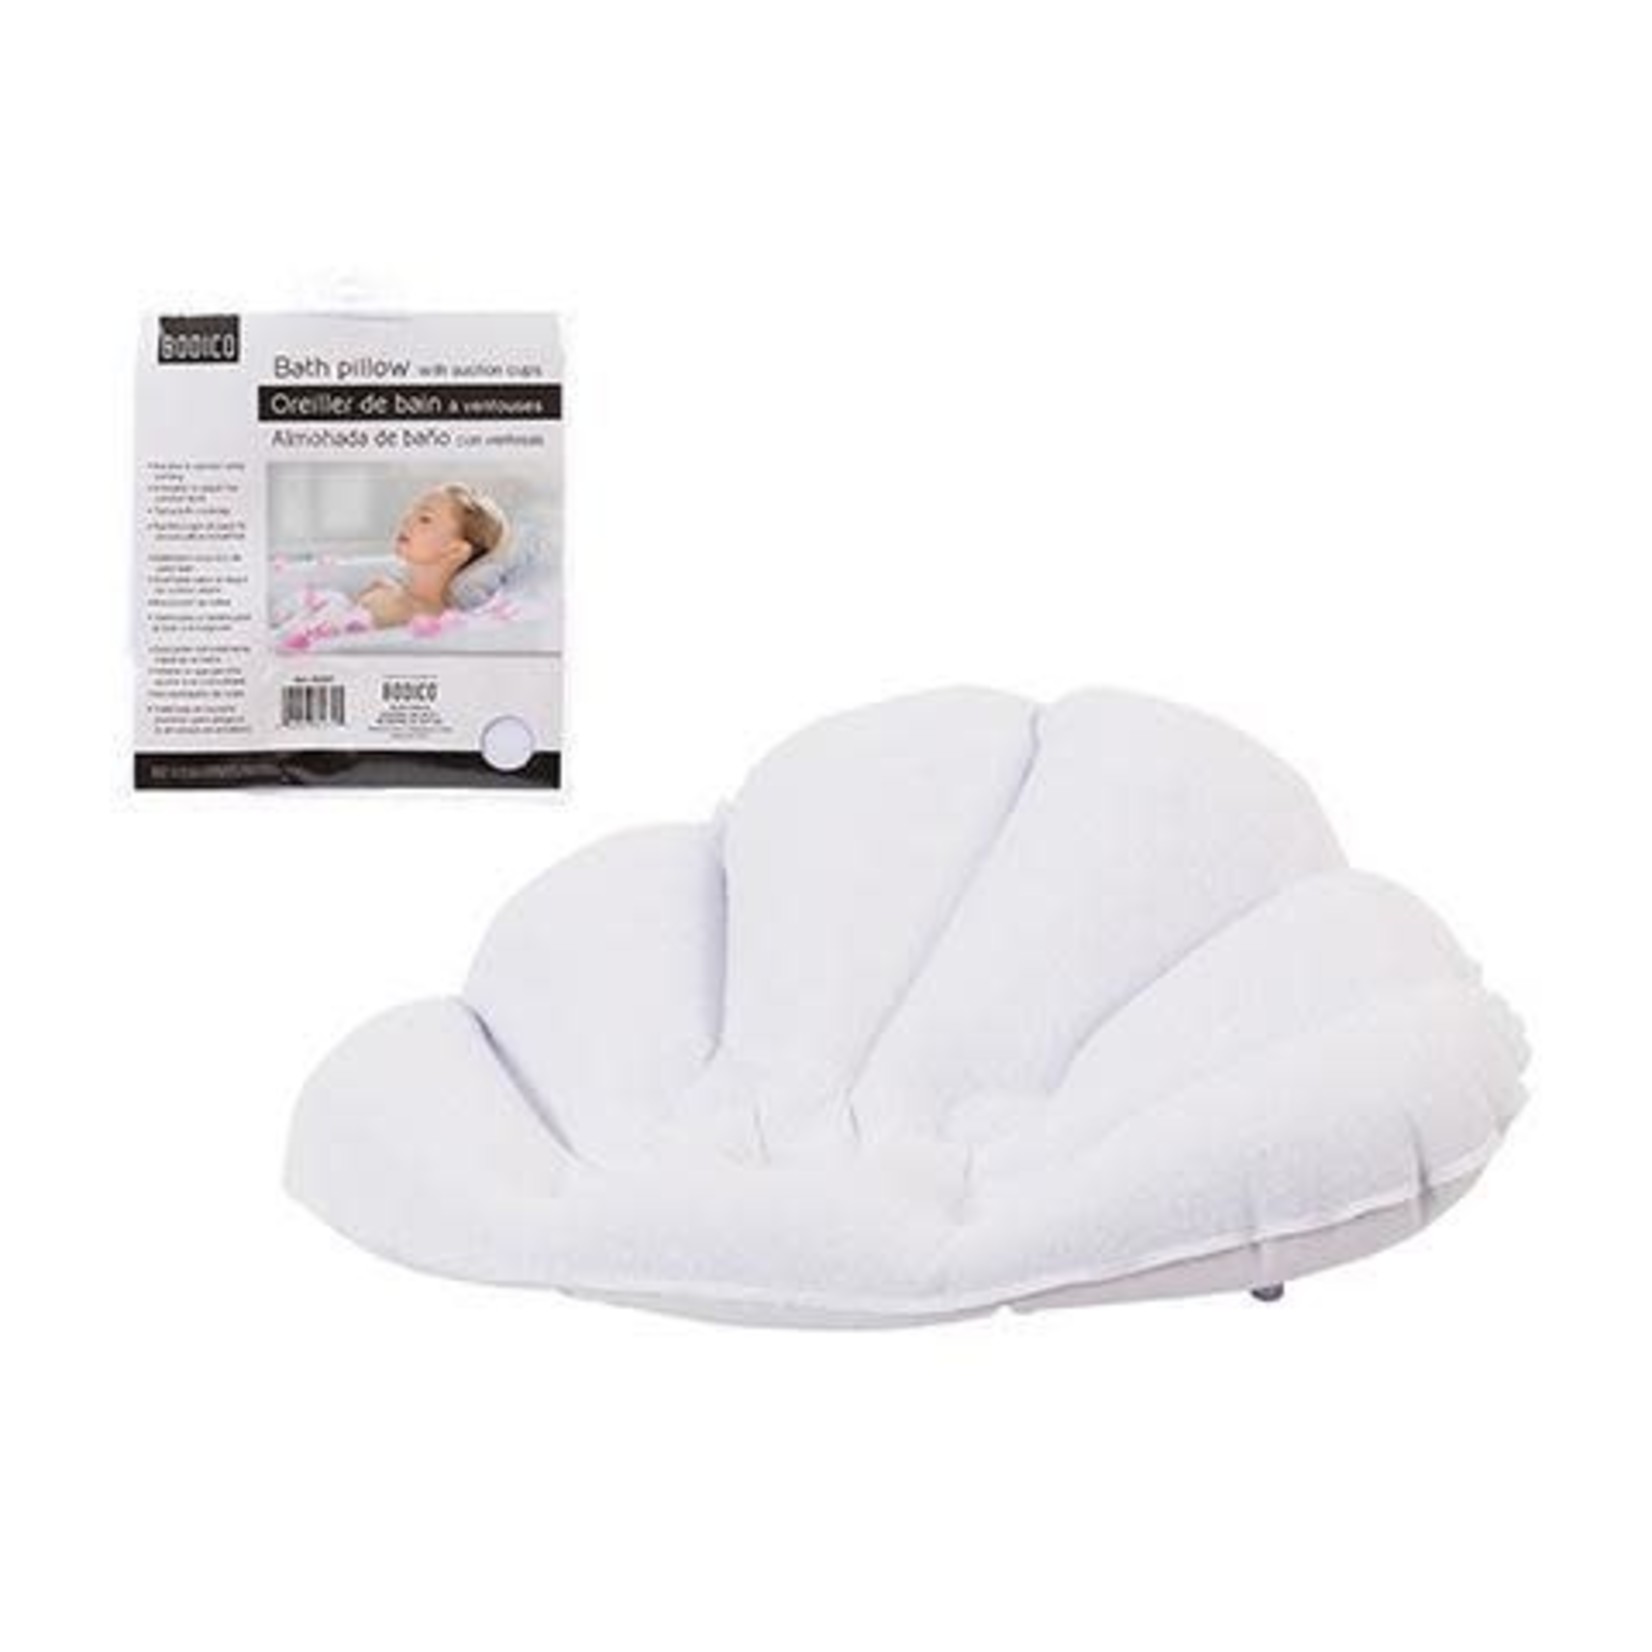 BATH PILLOW WITH SUCTION CUPS